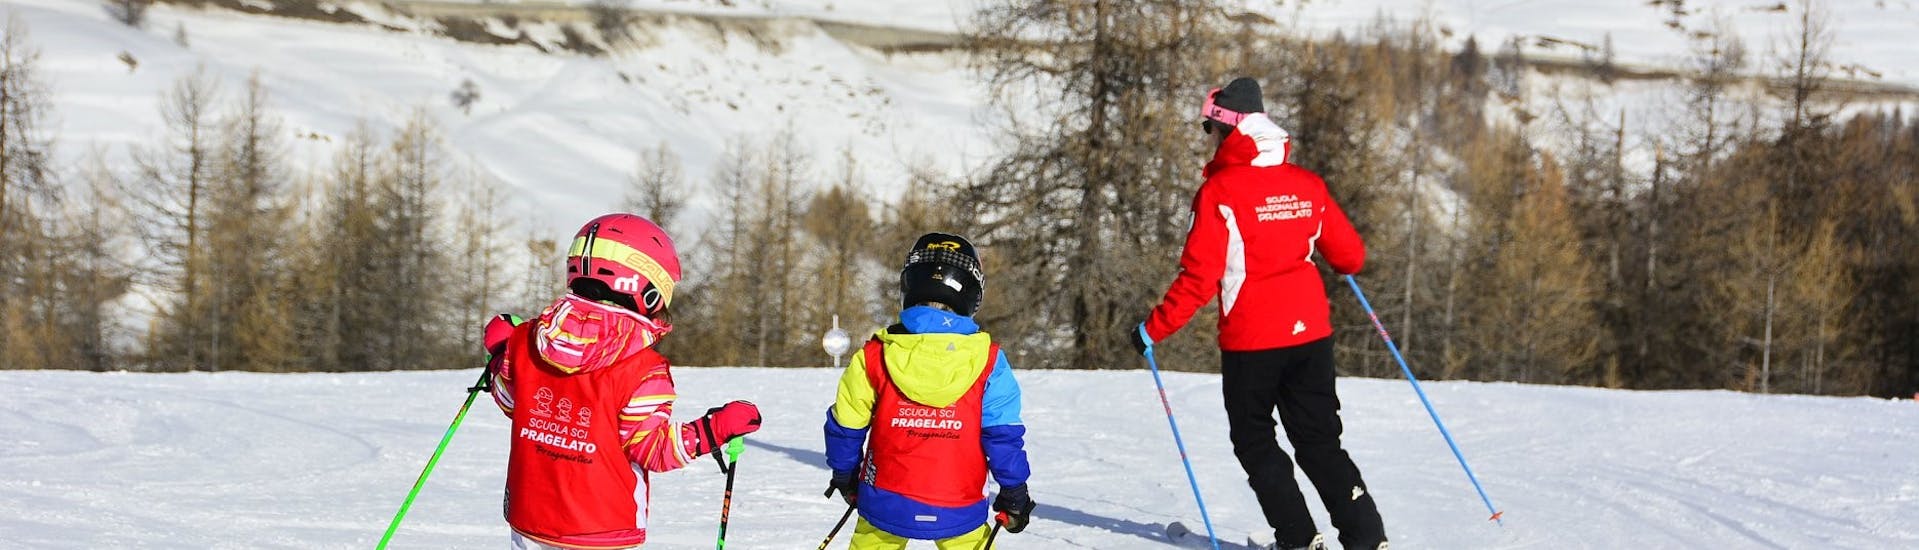 Ski instructors show the technique in Pragelato during one of the kids ski lessons for beginners. 